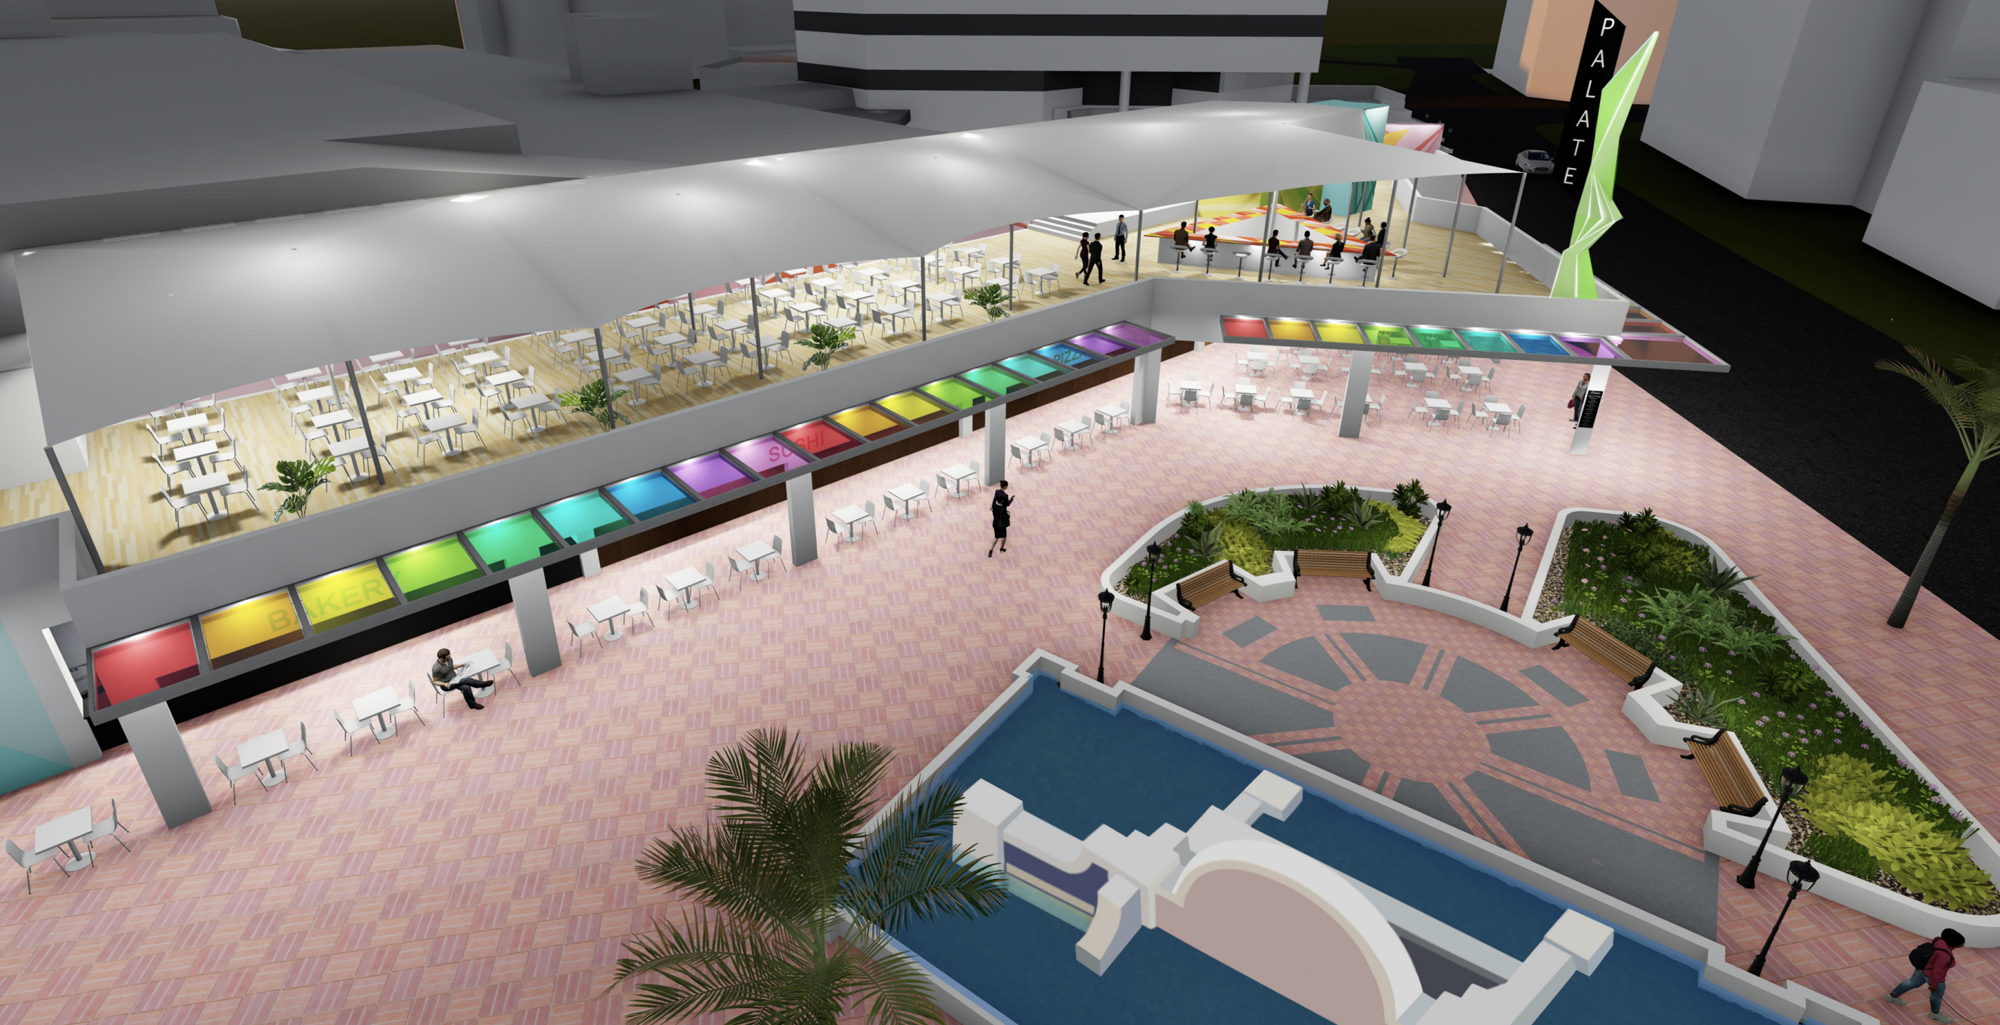 Palate was proposed as a food court with open-air seating, an upstairs bar and a colorful design scheme. (Courtesy image)